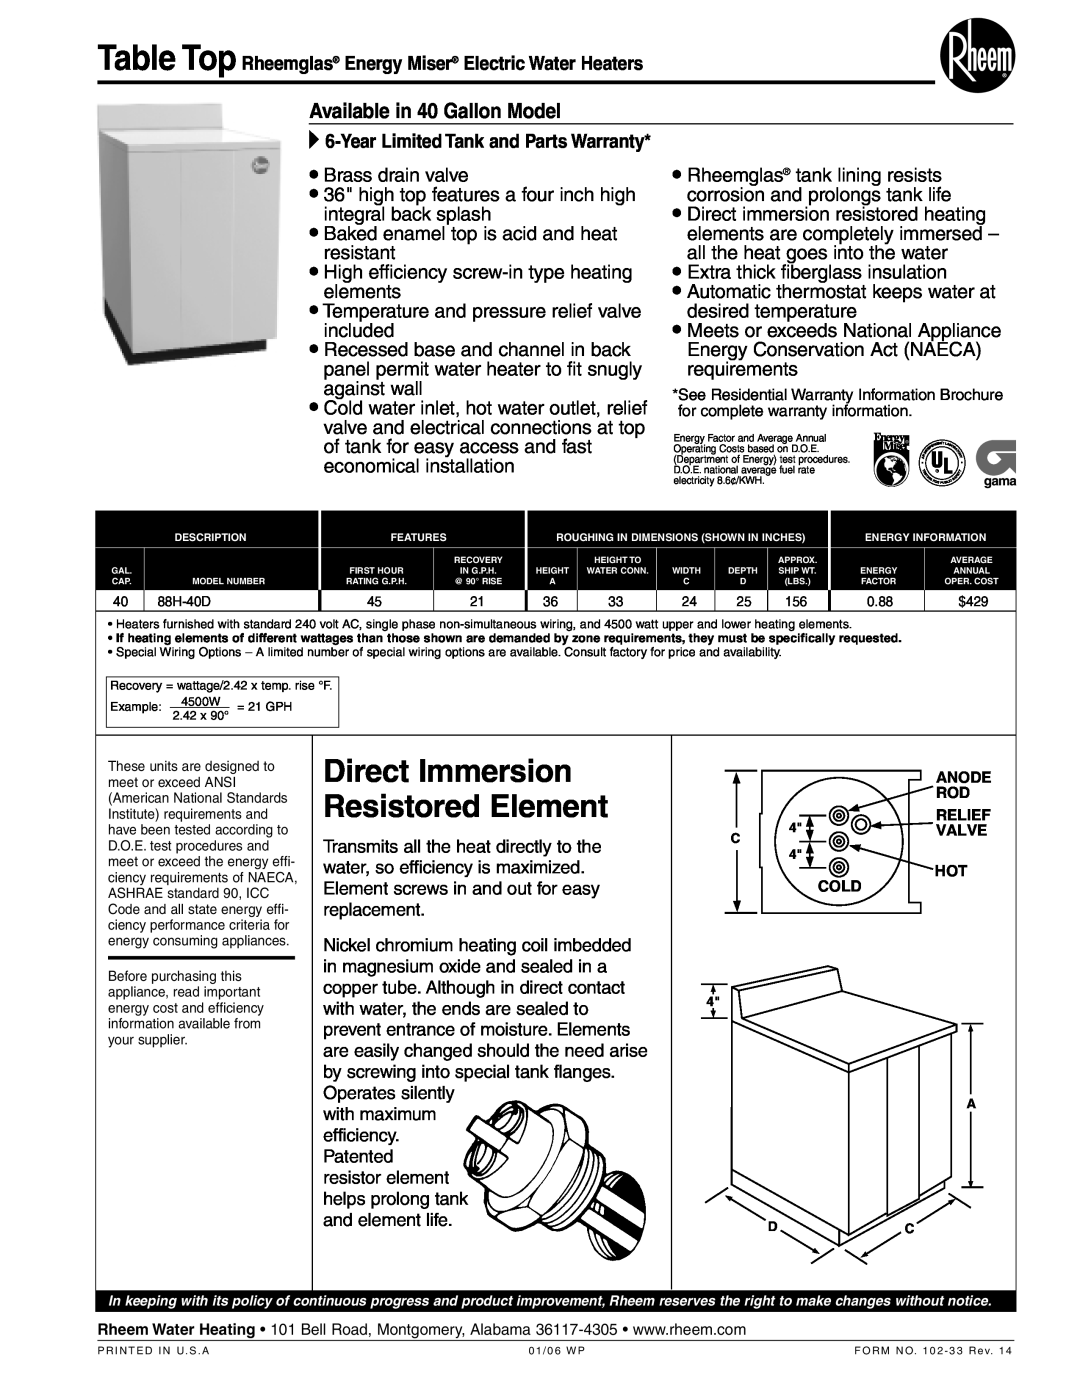 Rheem warranty Direct Immersion Resistored Element, Available in 40 Gallon Model 